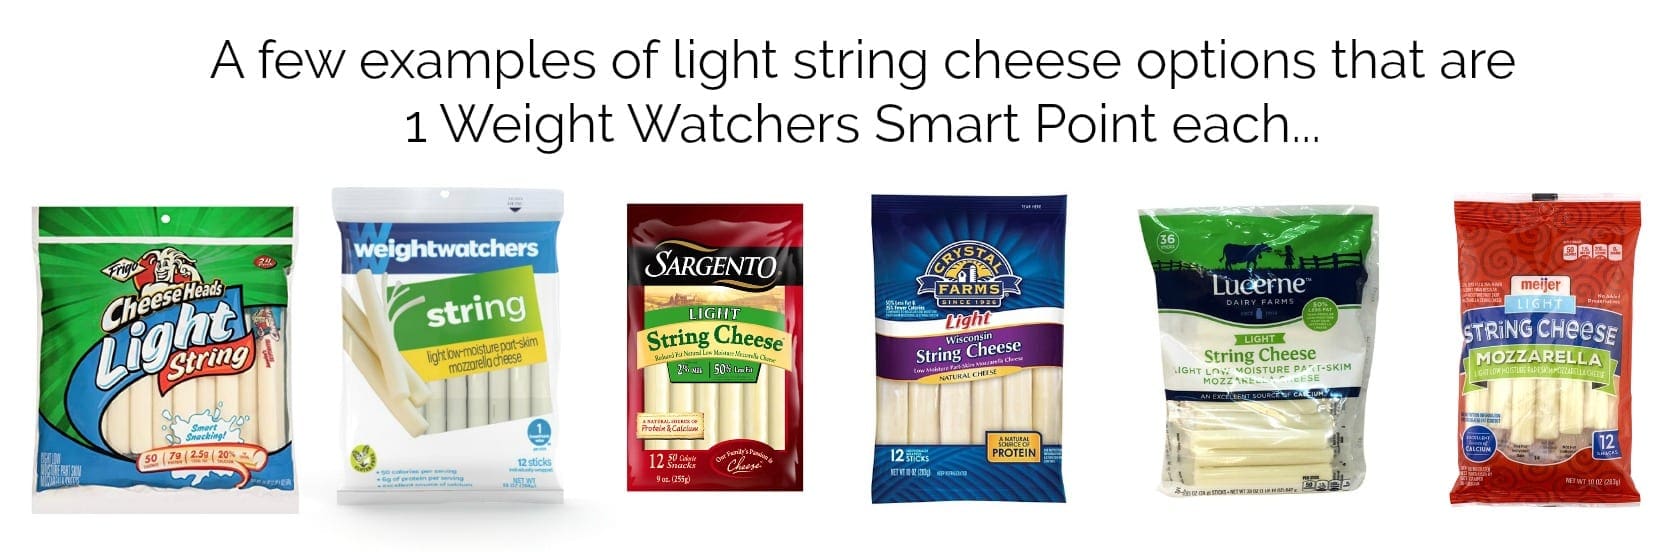 Examples of light string cheese options that are just 1 Weight Watchers Smart Point each.